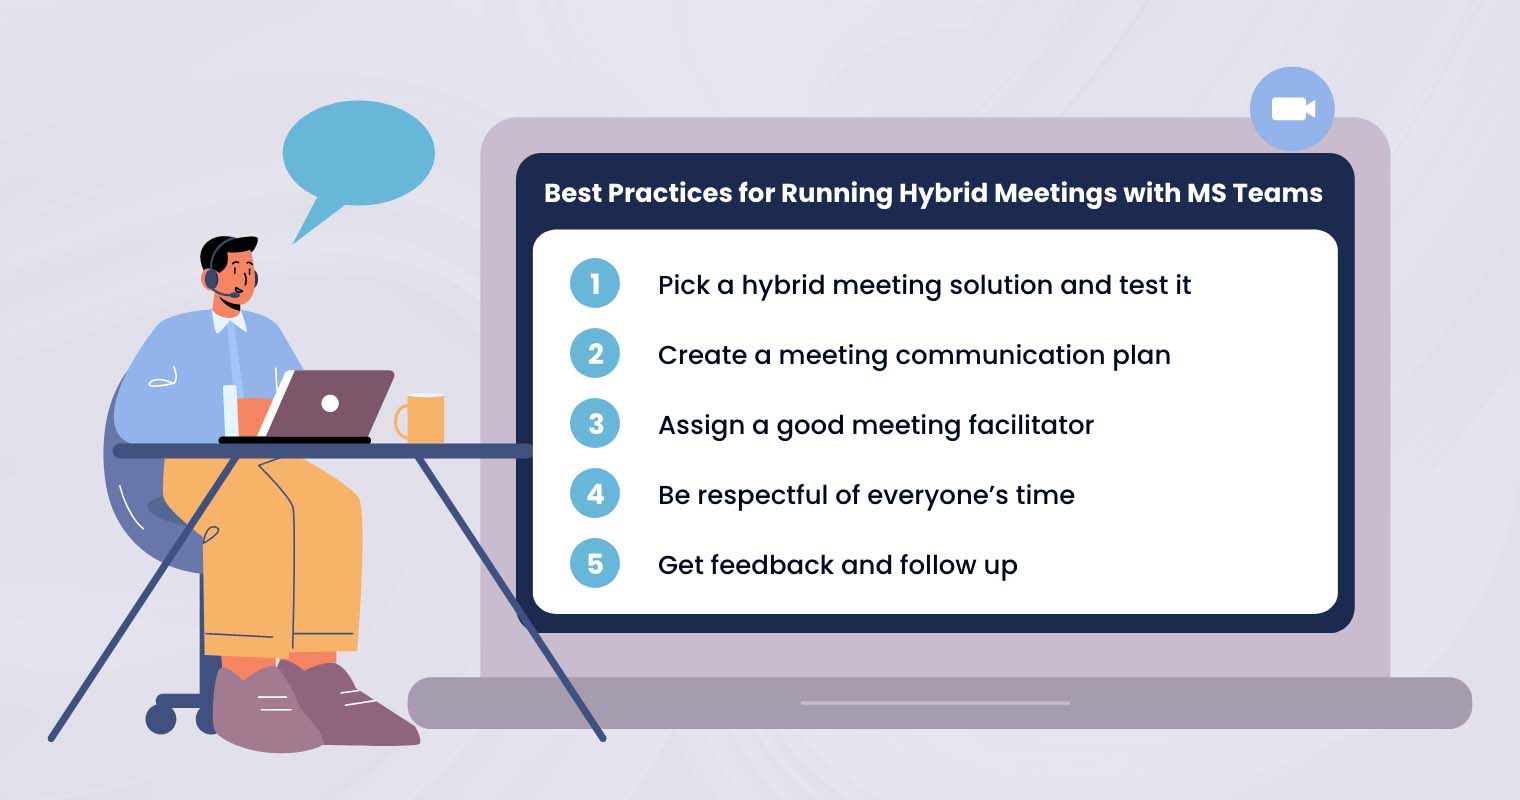 Best Practices for Running Hybrid Meetings with MS Teams